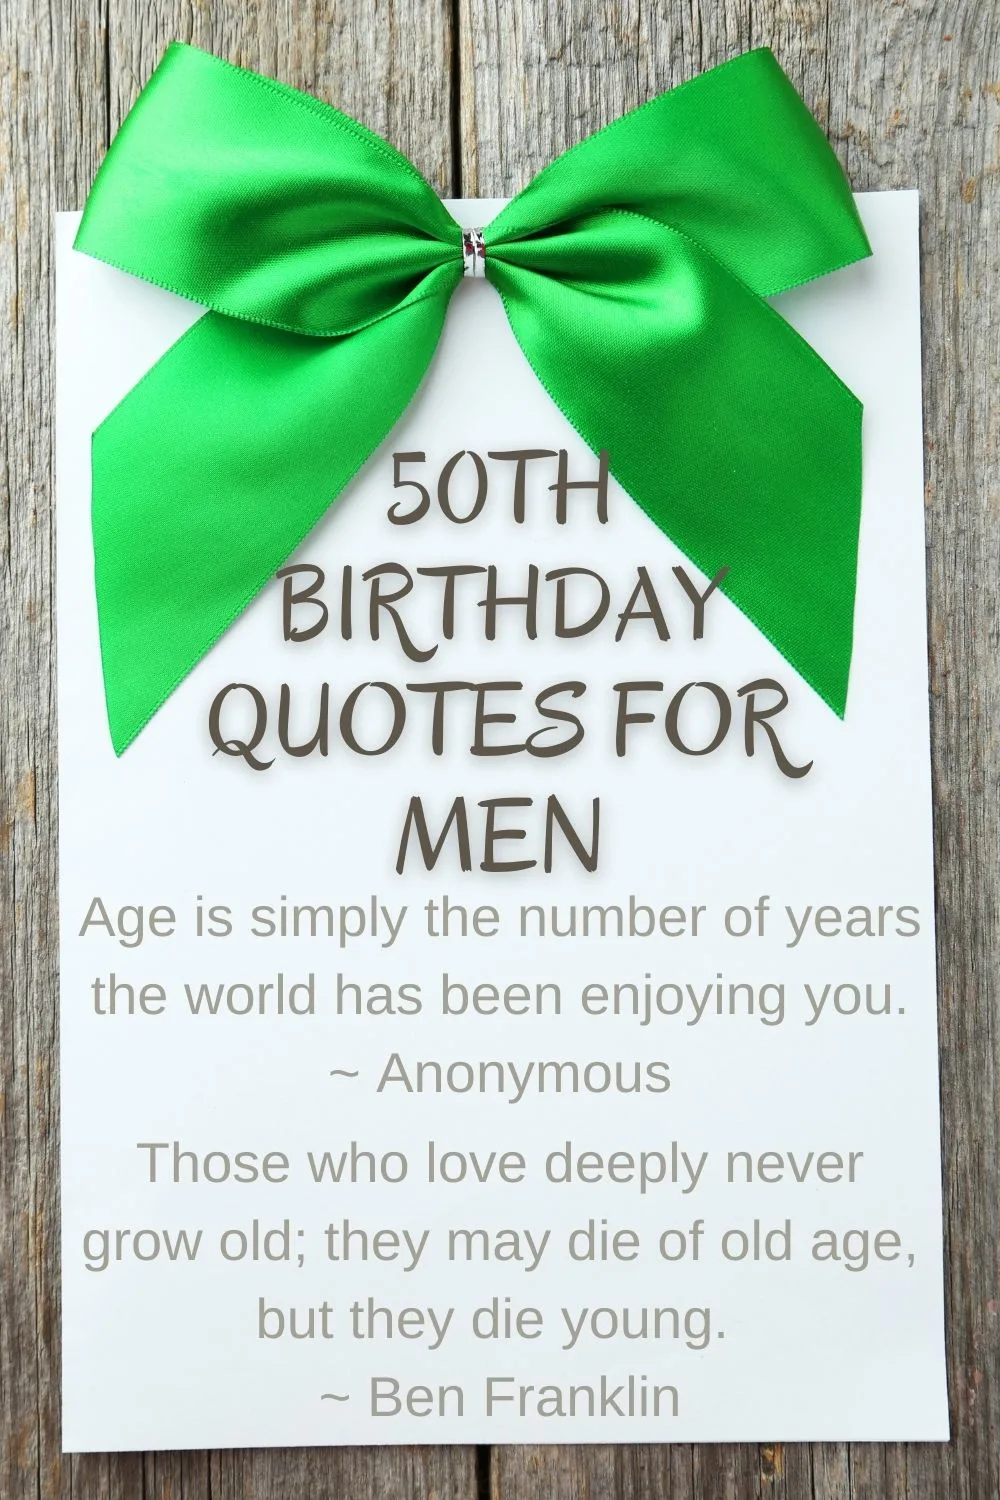 50th birthay quotes for men